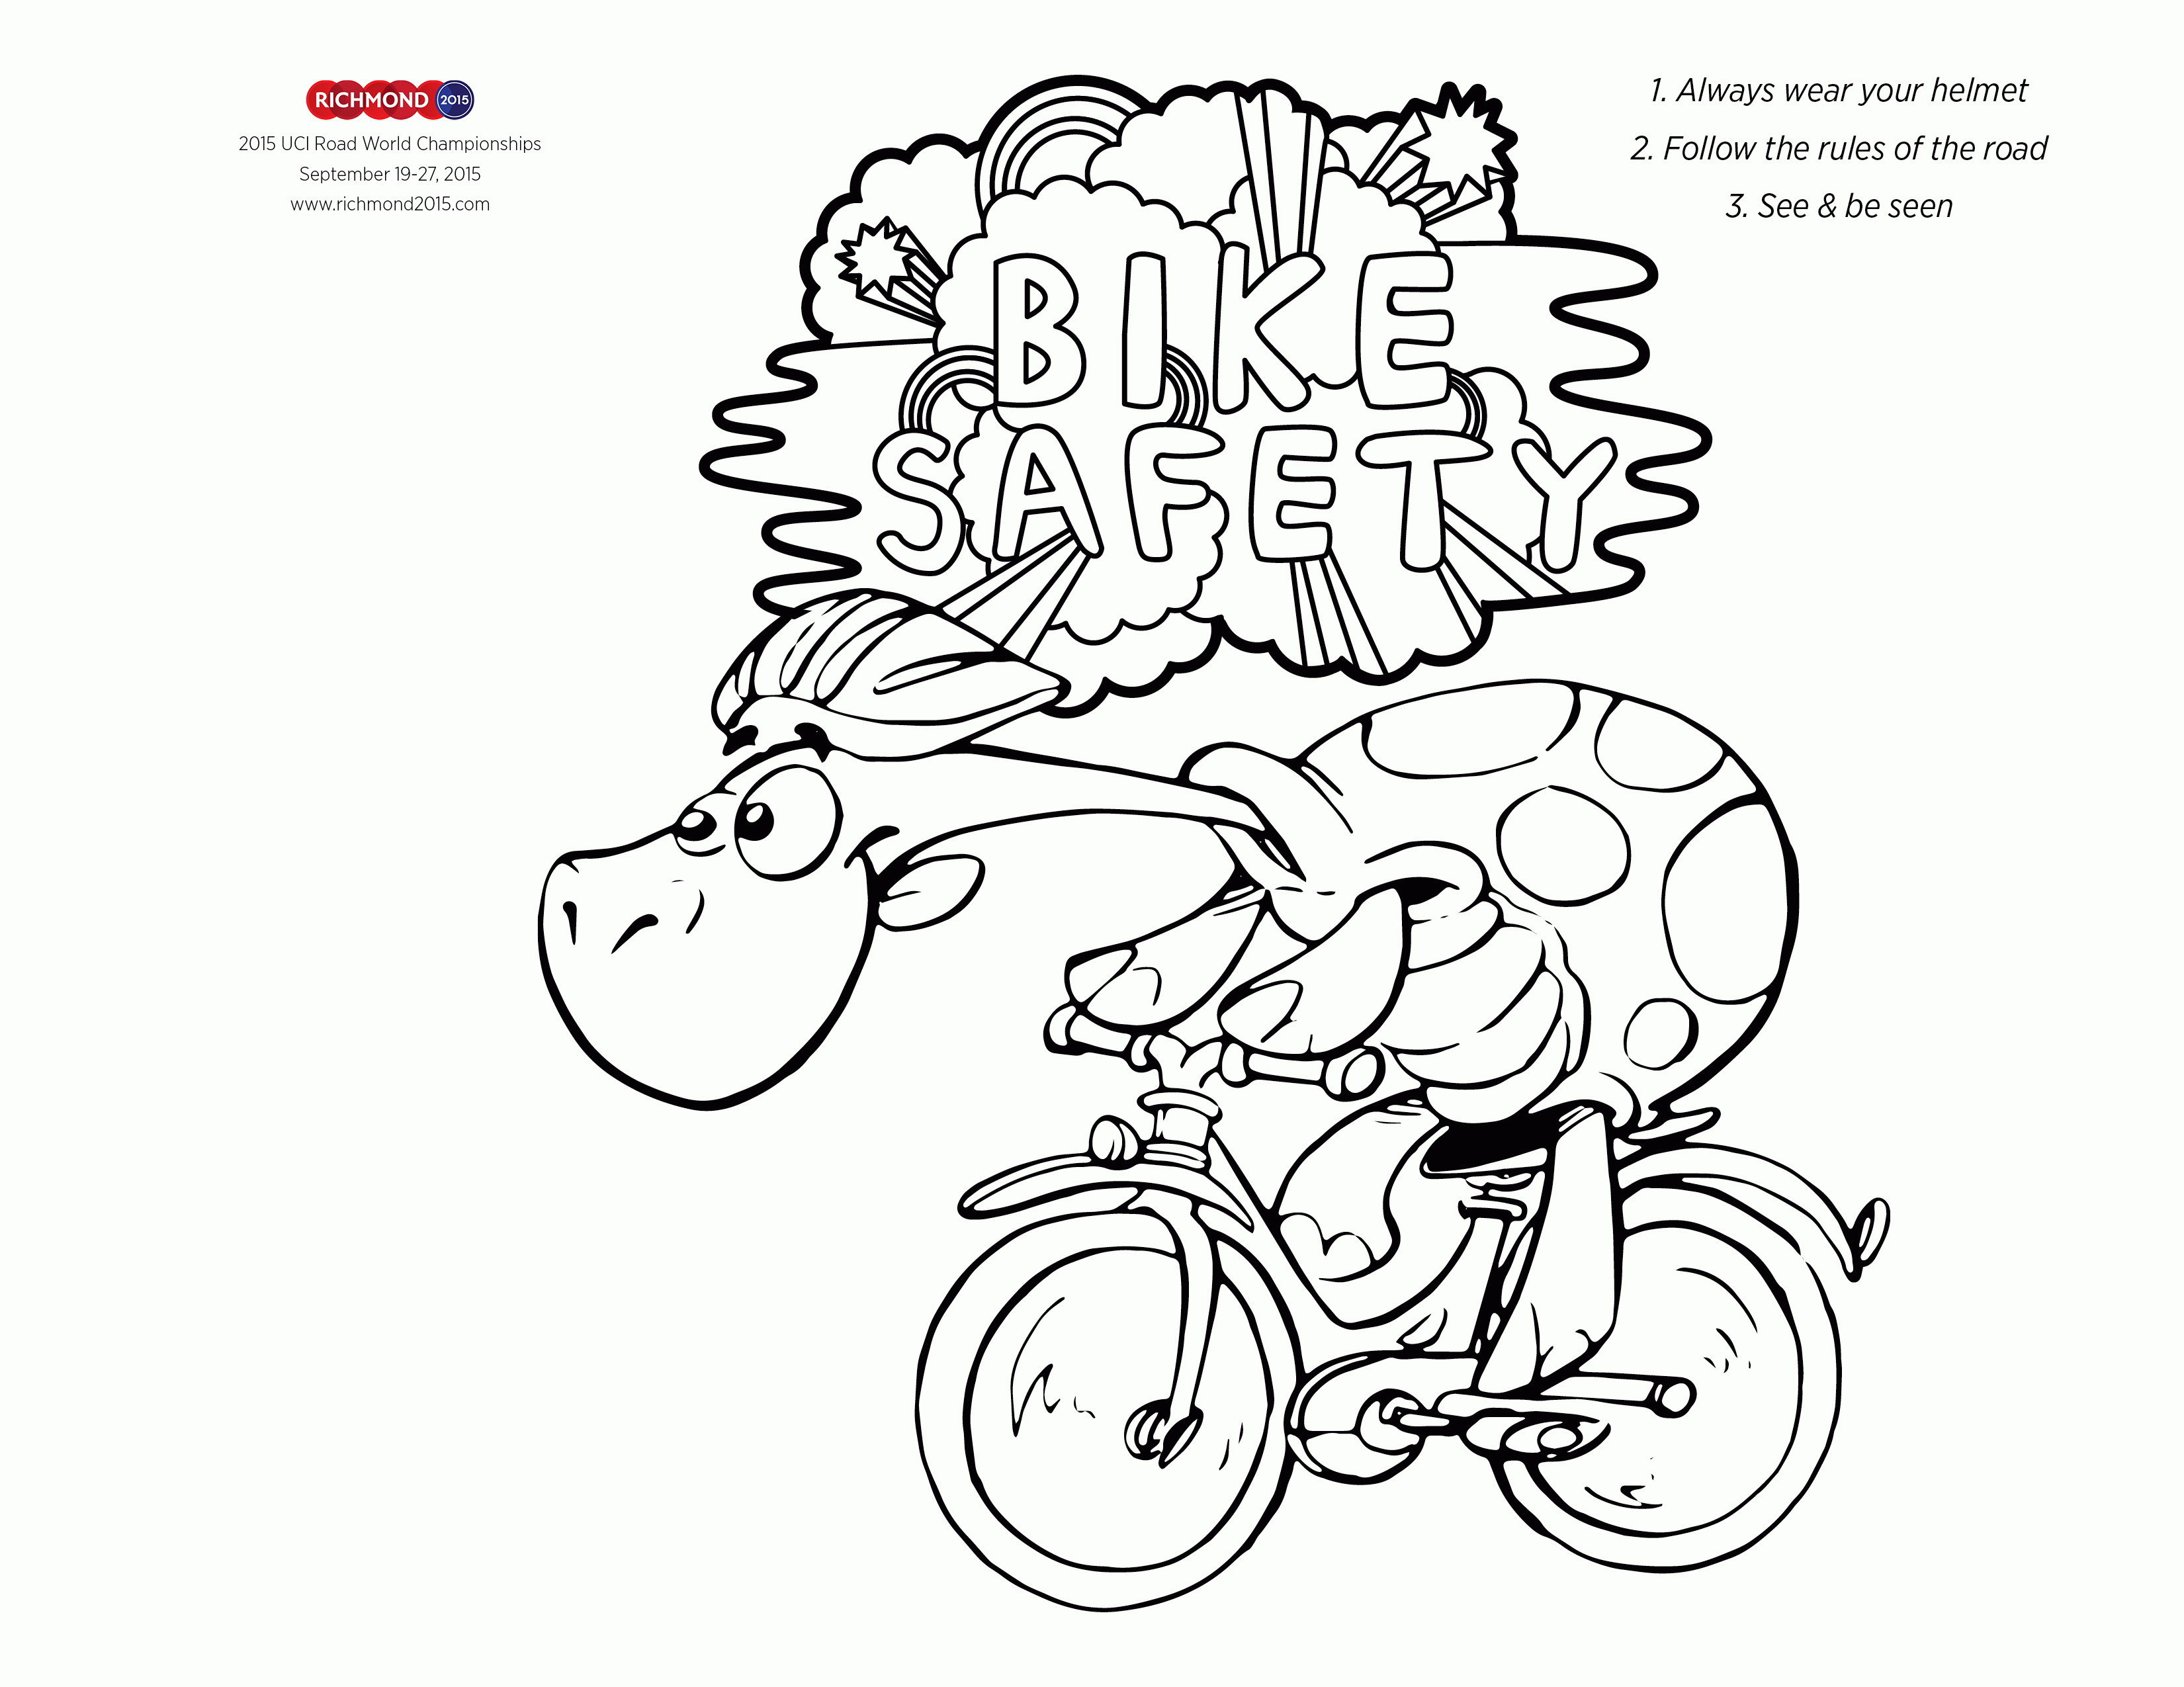 Bike Safety - Coloring Pages for Kids and for Adults